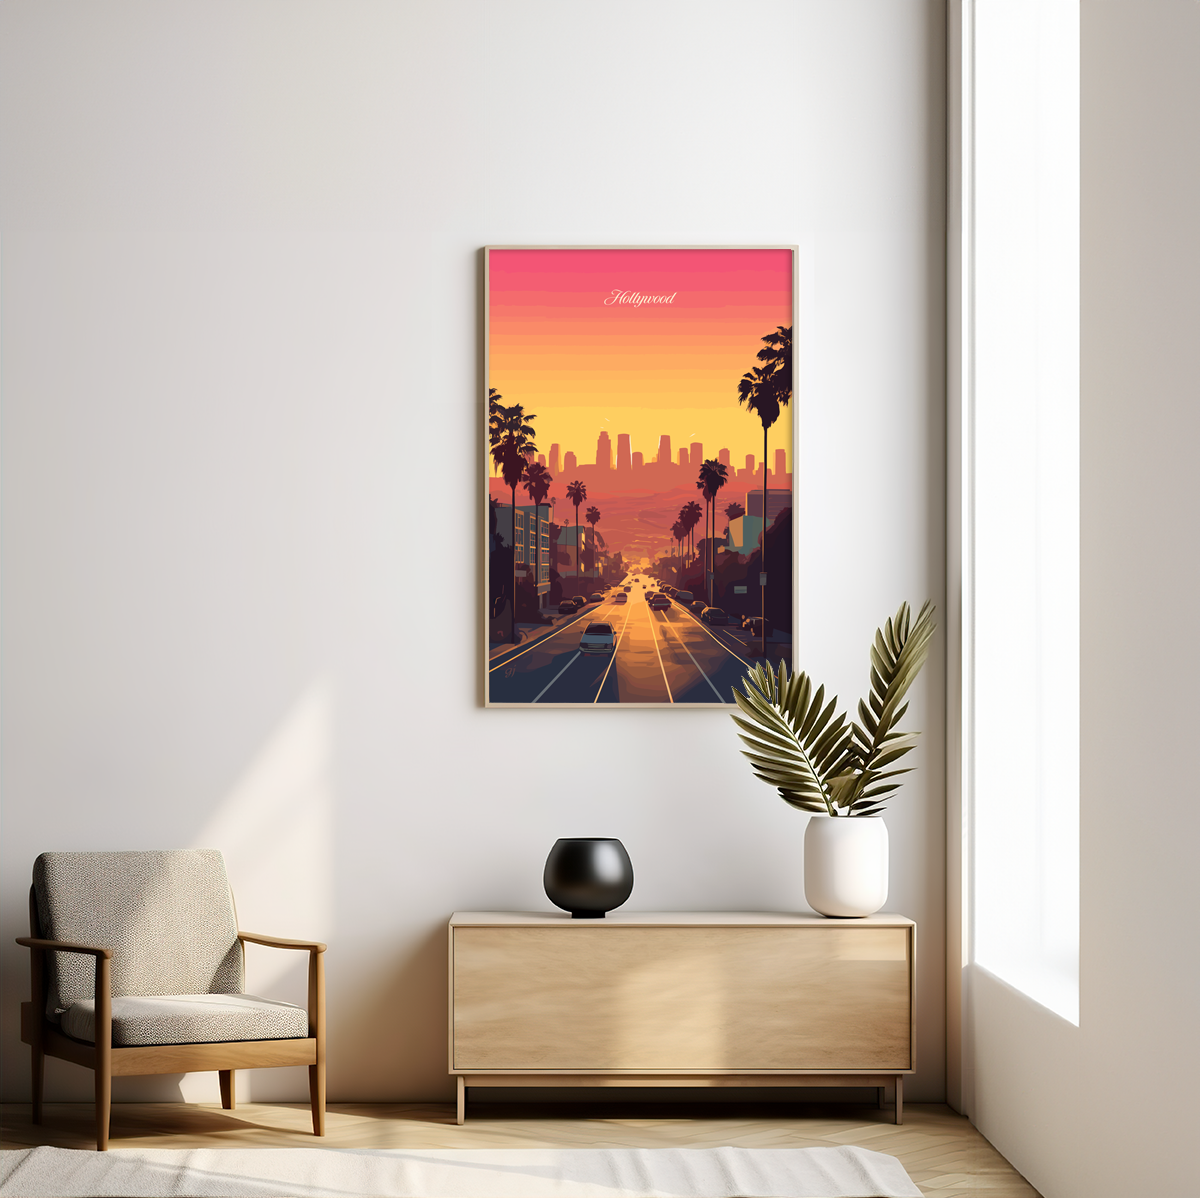 Hollywood poster by bon voyage design